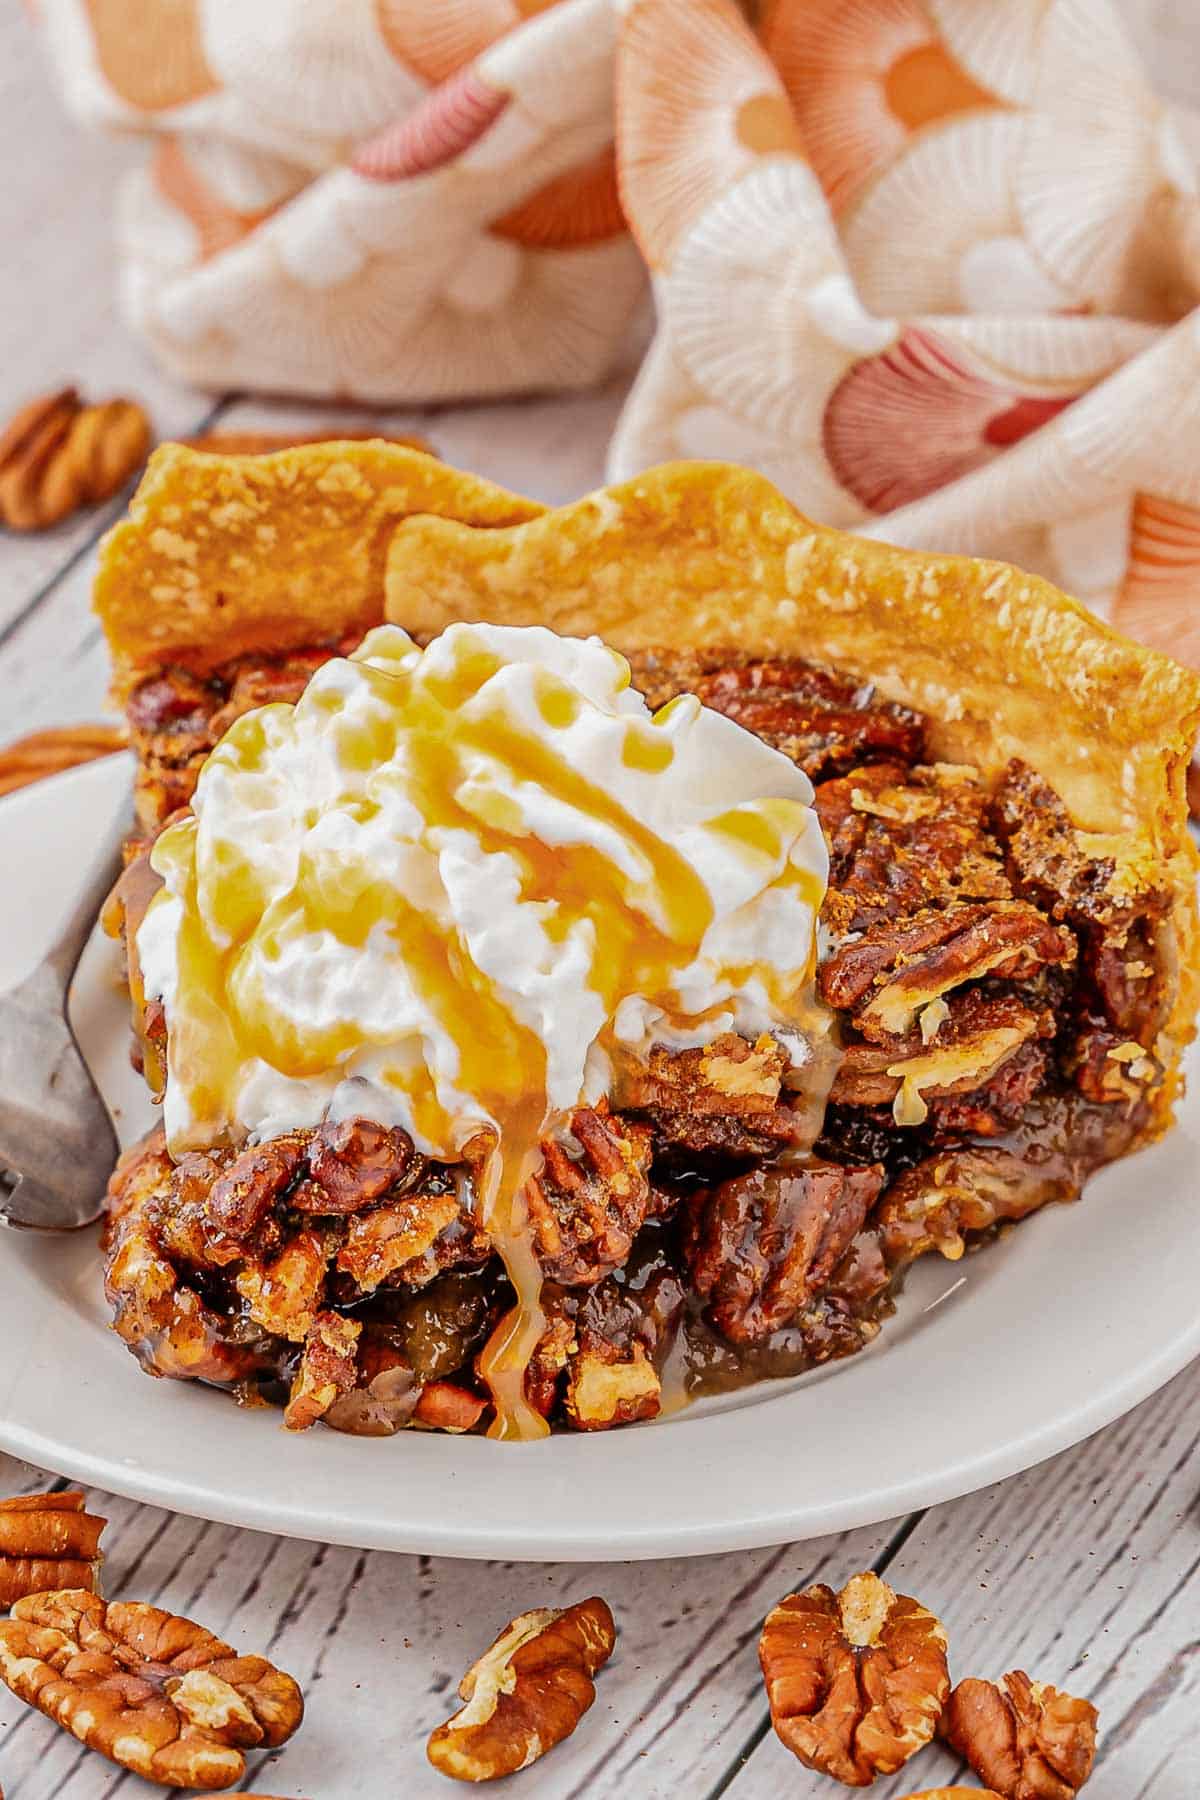 A slice of pecan pie on a white plate topped with whipped cream a caramel drizzle.